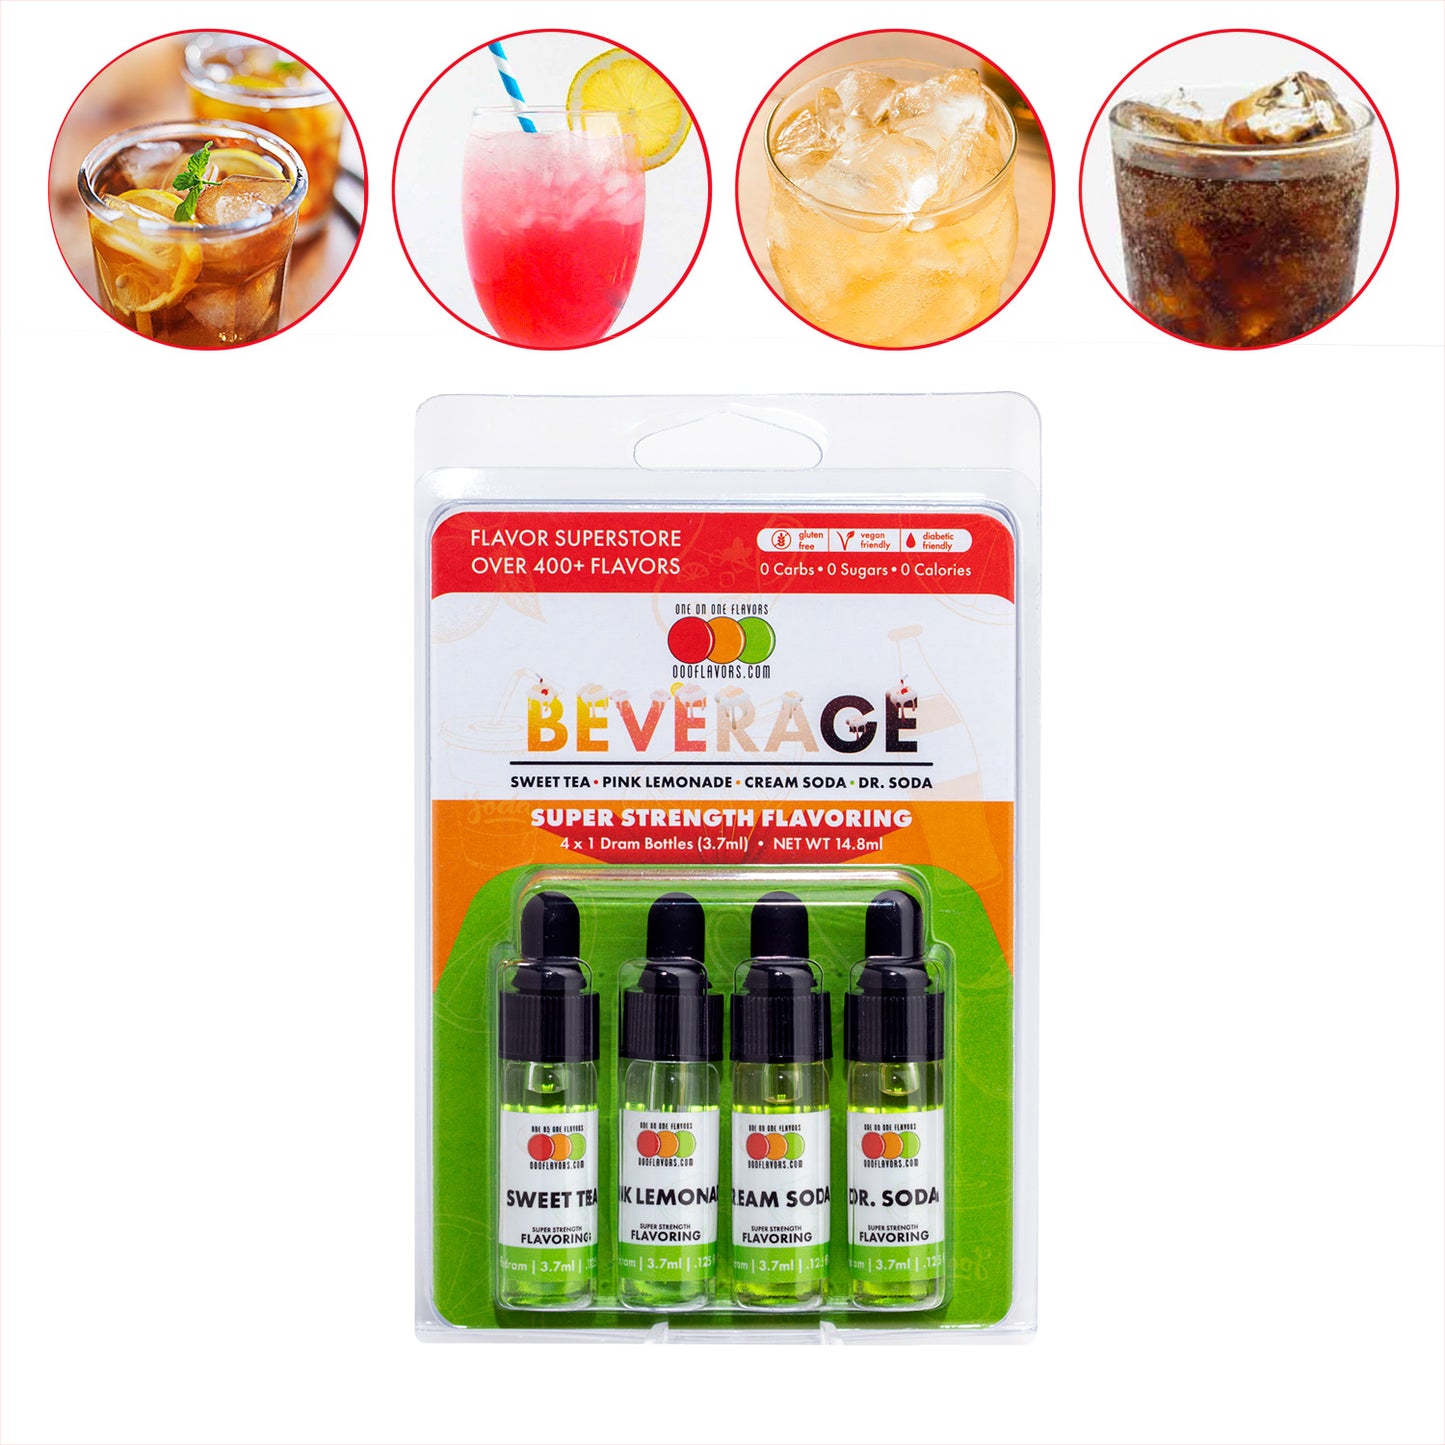 KETO "Beverage" Flavor 4 Pack - Flavored Liquid Concentrate